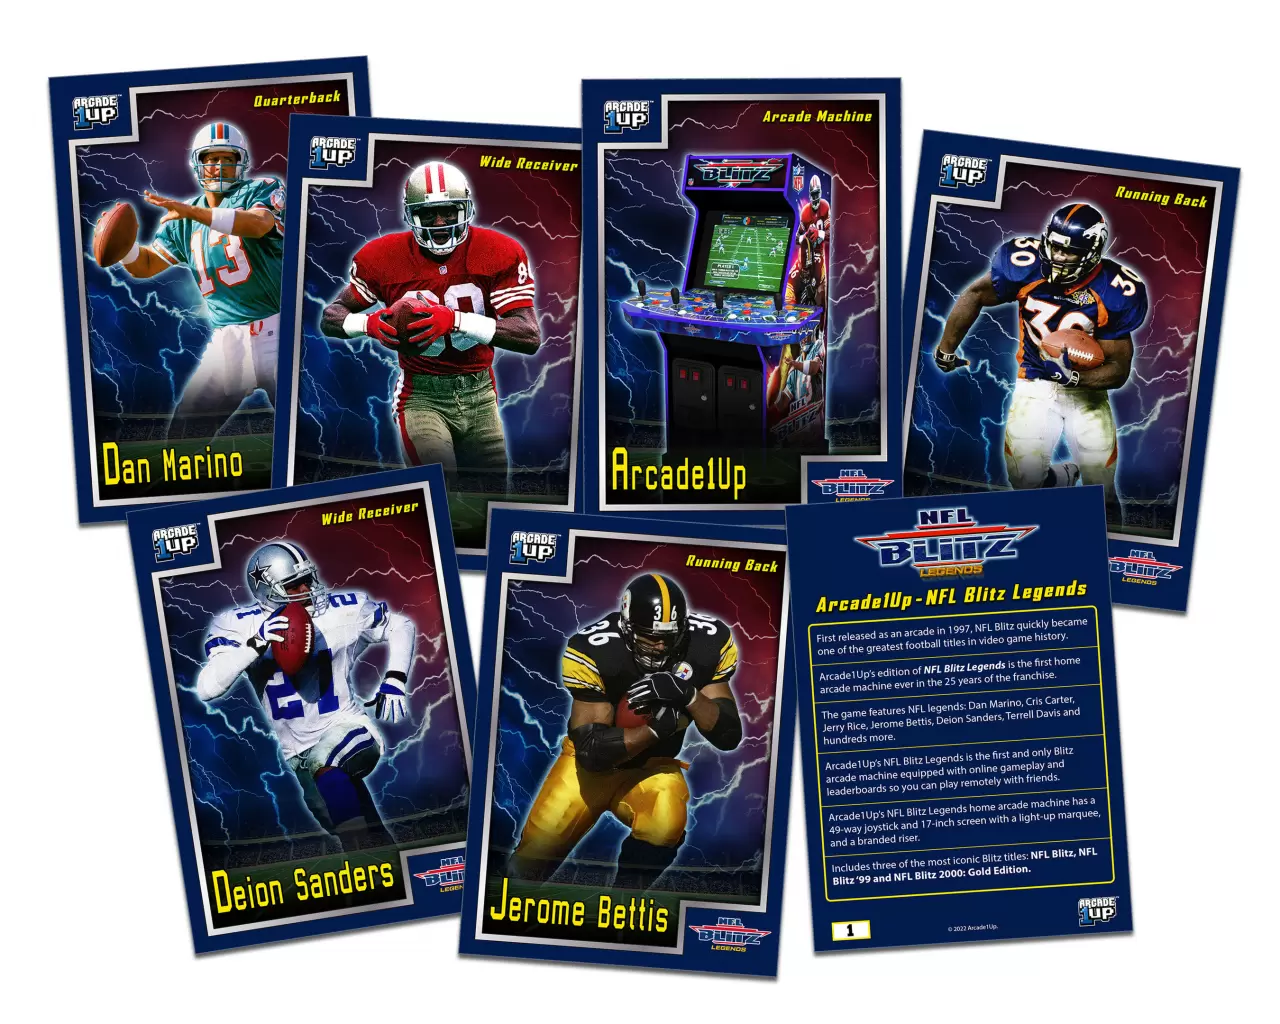 NFL Blitz Legends by Arcade1Up is now available img#1